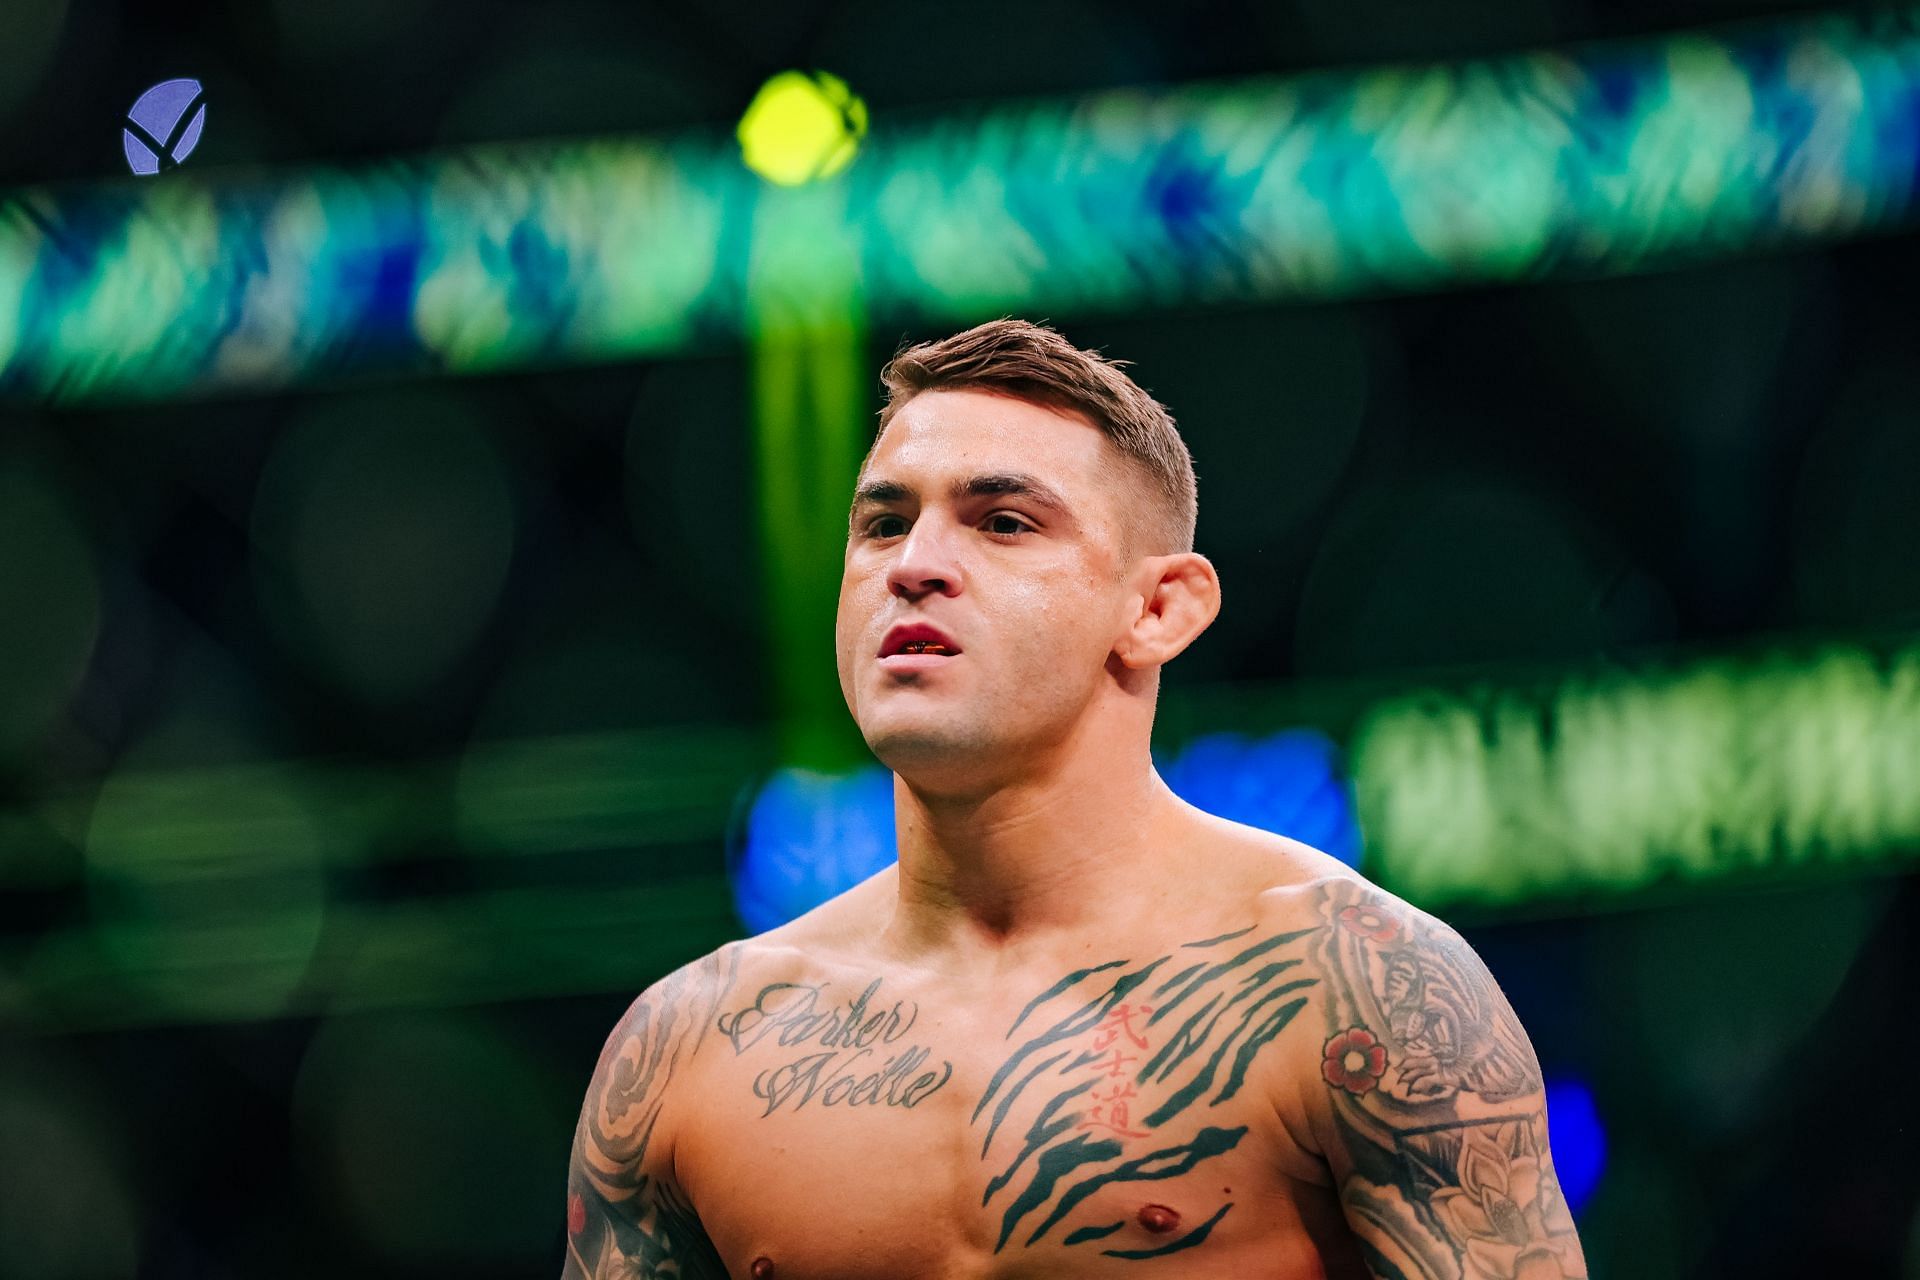 Could Dustin Poirier welcome Alexander Volkanovski to the lightweight division?